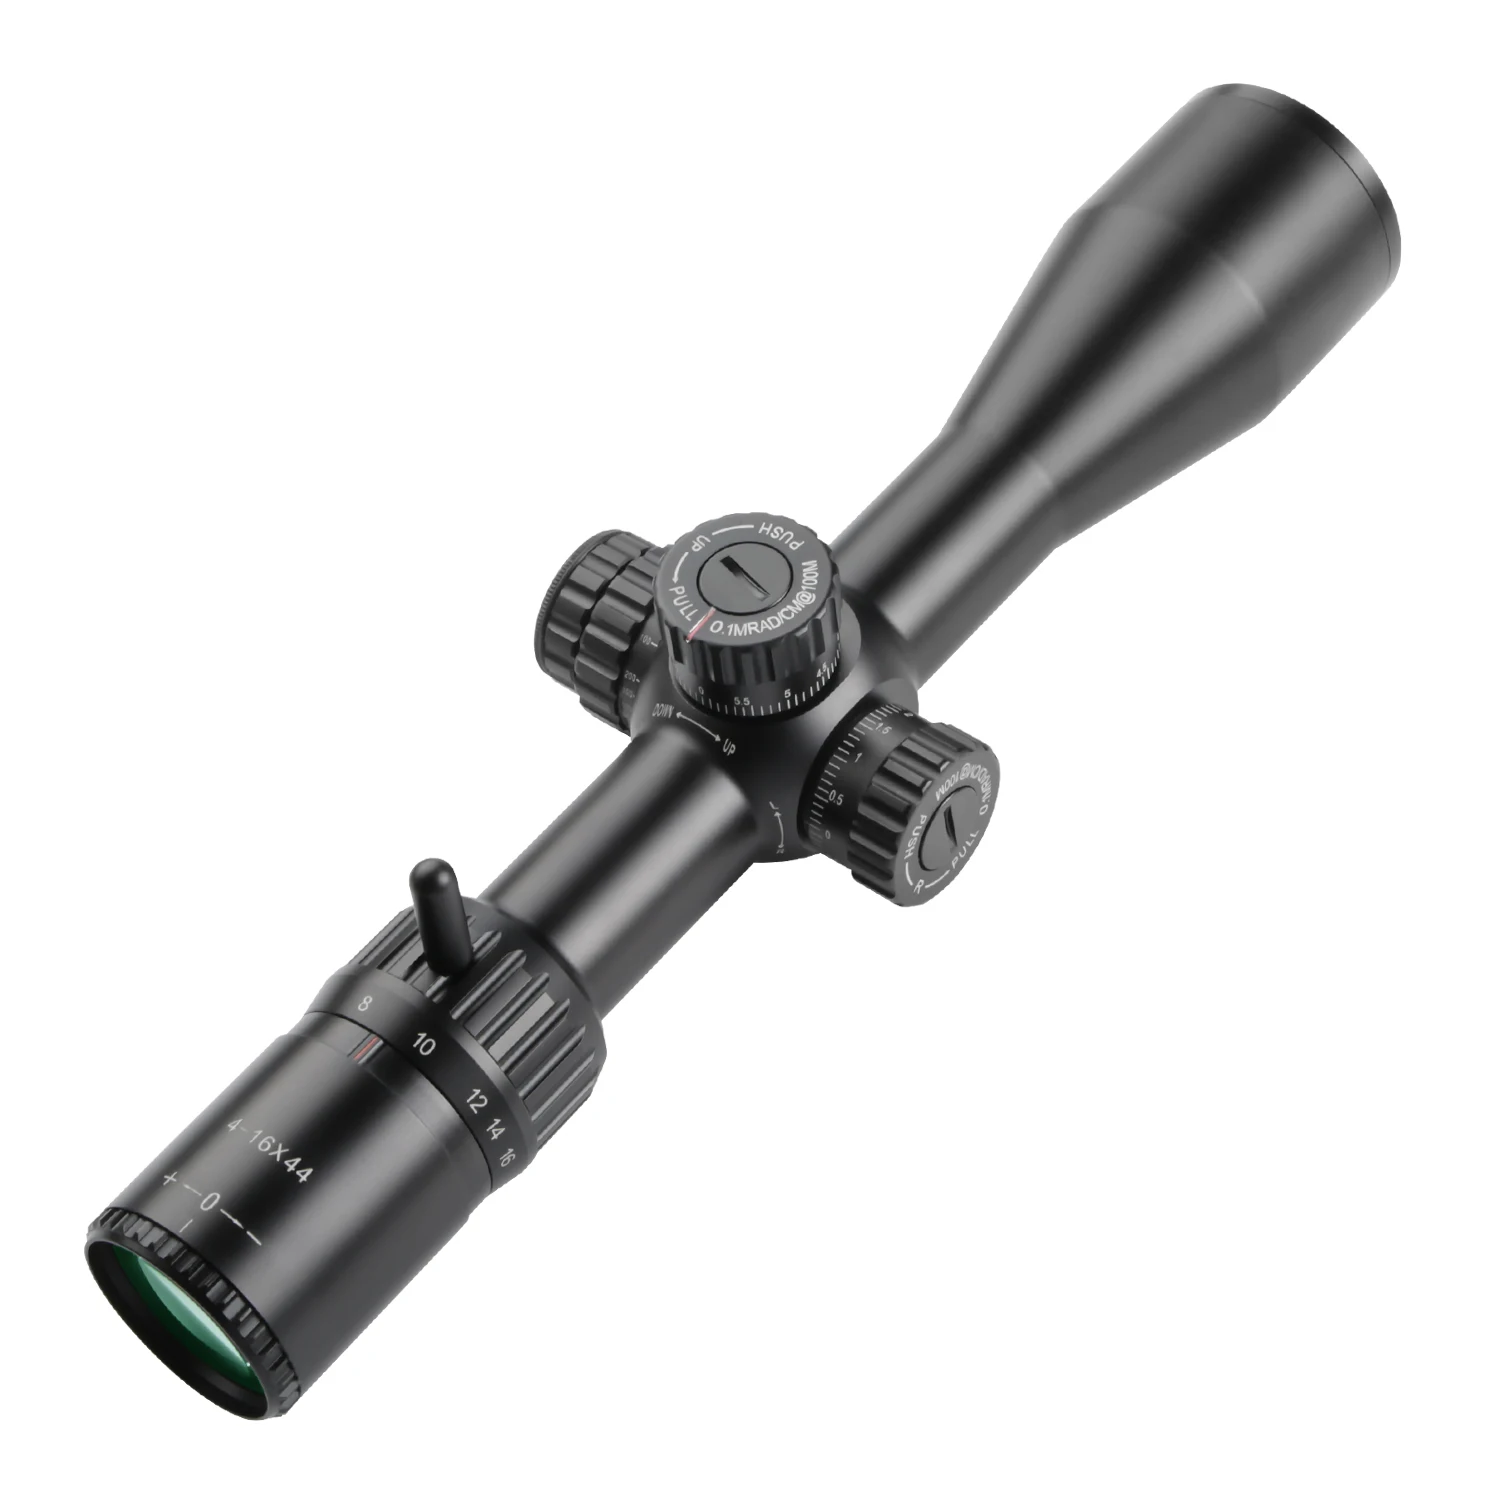 

T-EAGLE MR PRO 4-16X44 SFIR FFP illumination Glass Etched Reticle Hunting Riflescope scopes & accessories, Black